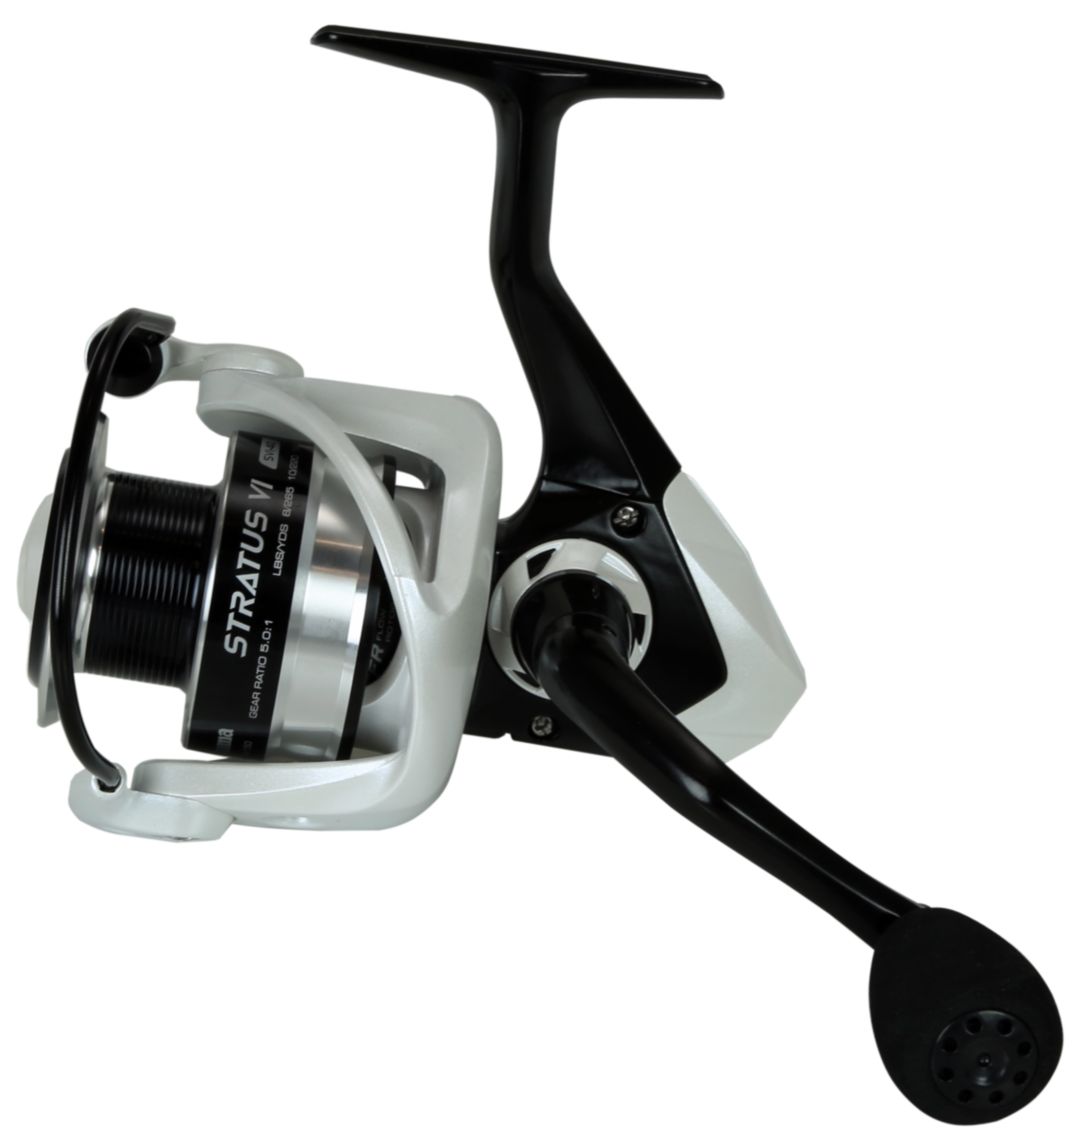 Looking for a cheap tough spinning reel